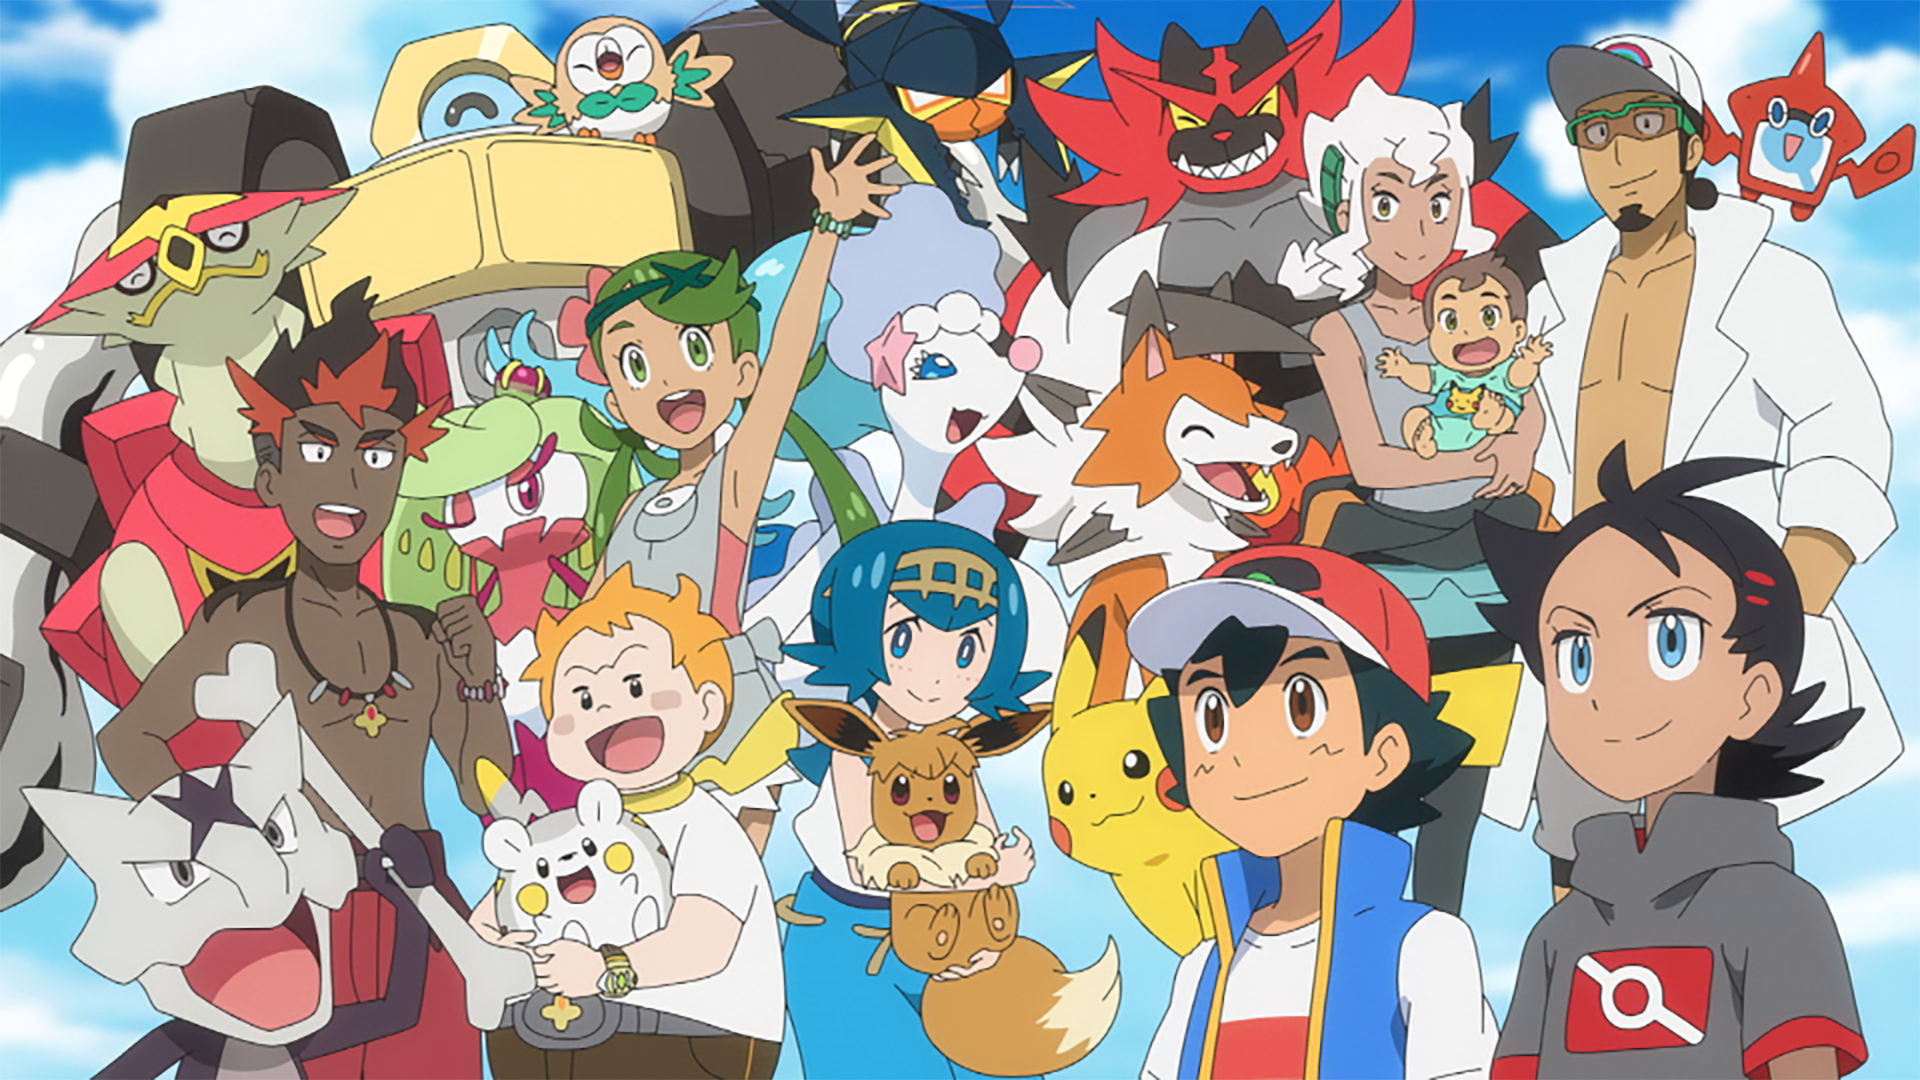 Final Episodes of 'Pokémon Journeys: The Series' to Release in March